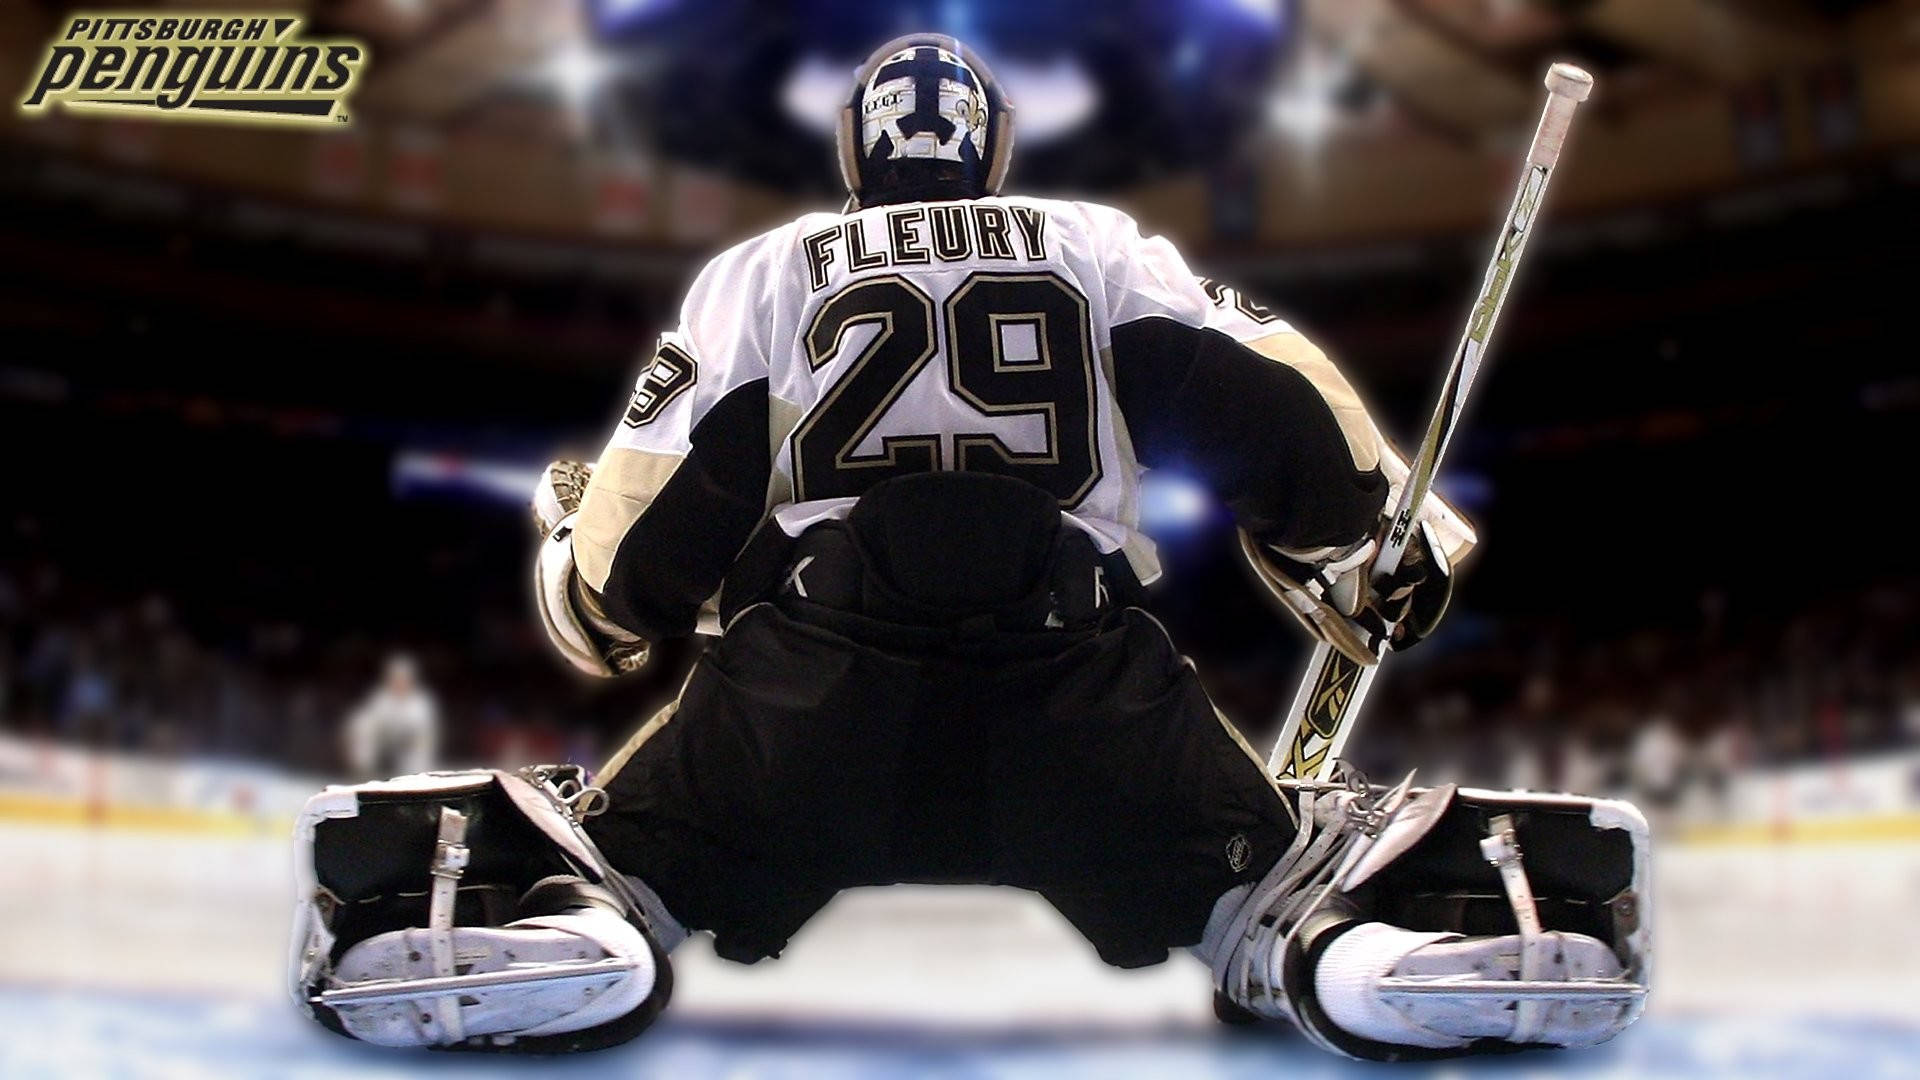 200+] Pittsburgh Penguins Backgrounds